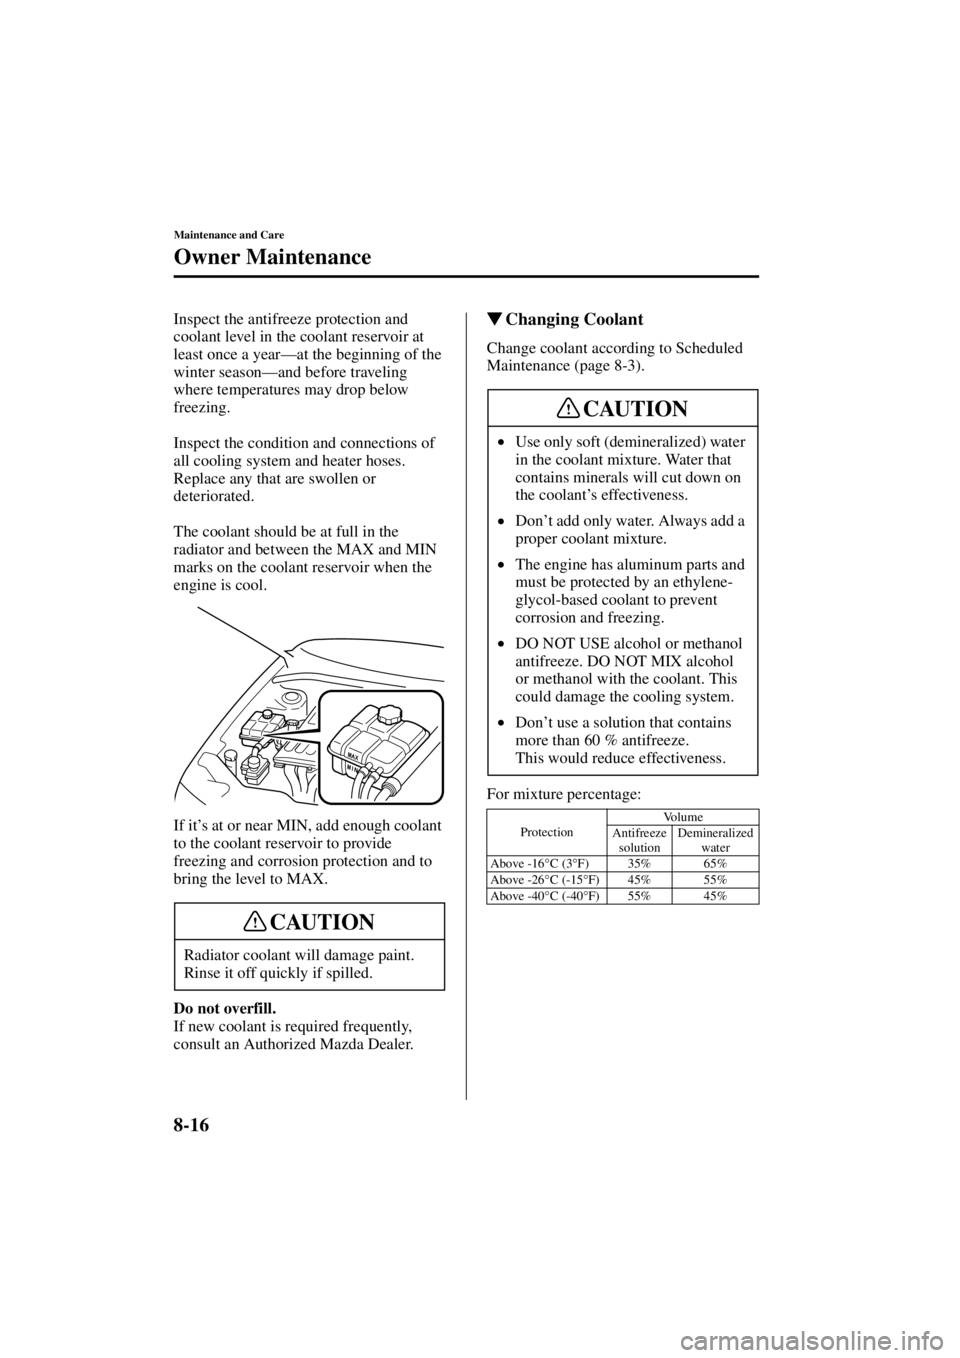 MAZDA MODEL 3 5-DOOR 2004 User Guide 8-16
Maintenance and Care
Owner Maintenance
Form No. 8S18-EA-03I
Inspect the antifreeze protection and 
coolant level in the coolant reservoir at 
least once a year—at the beginning of the 
winter s